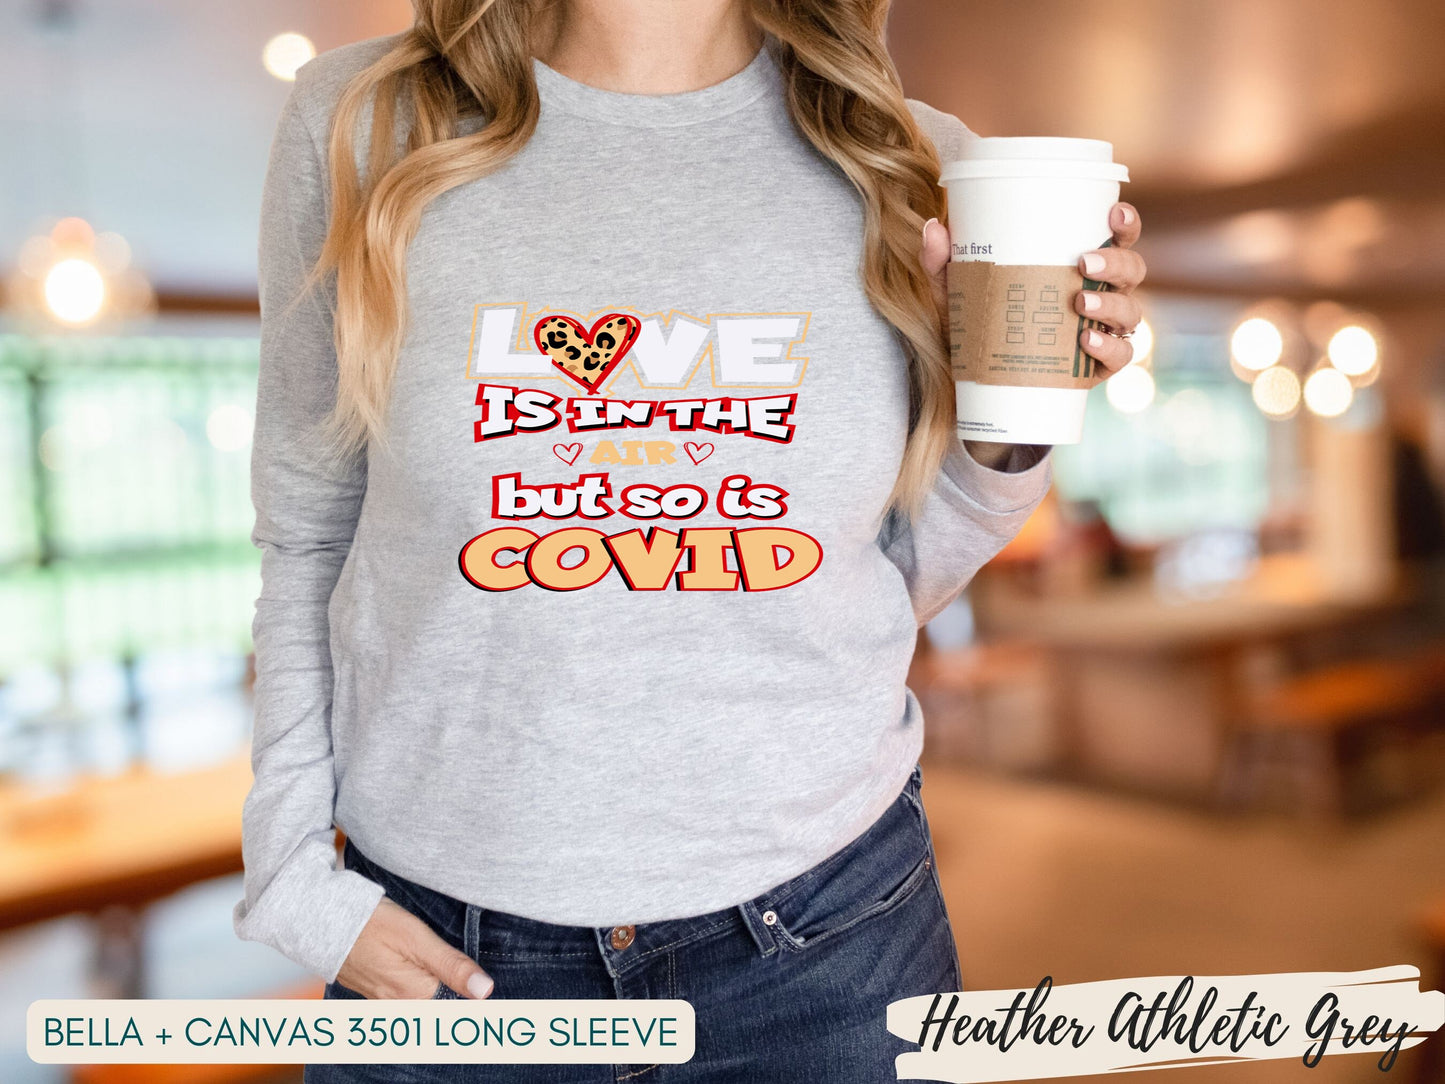 Funny Valentines Day Shirt, Love is in the Air But So is Covid Shirt, Long Sleeve, Short Sleeve Sweatshirt, Nurse Valentine Shirt - Mardonyx Sweatshirt